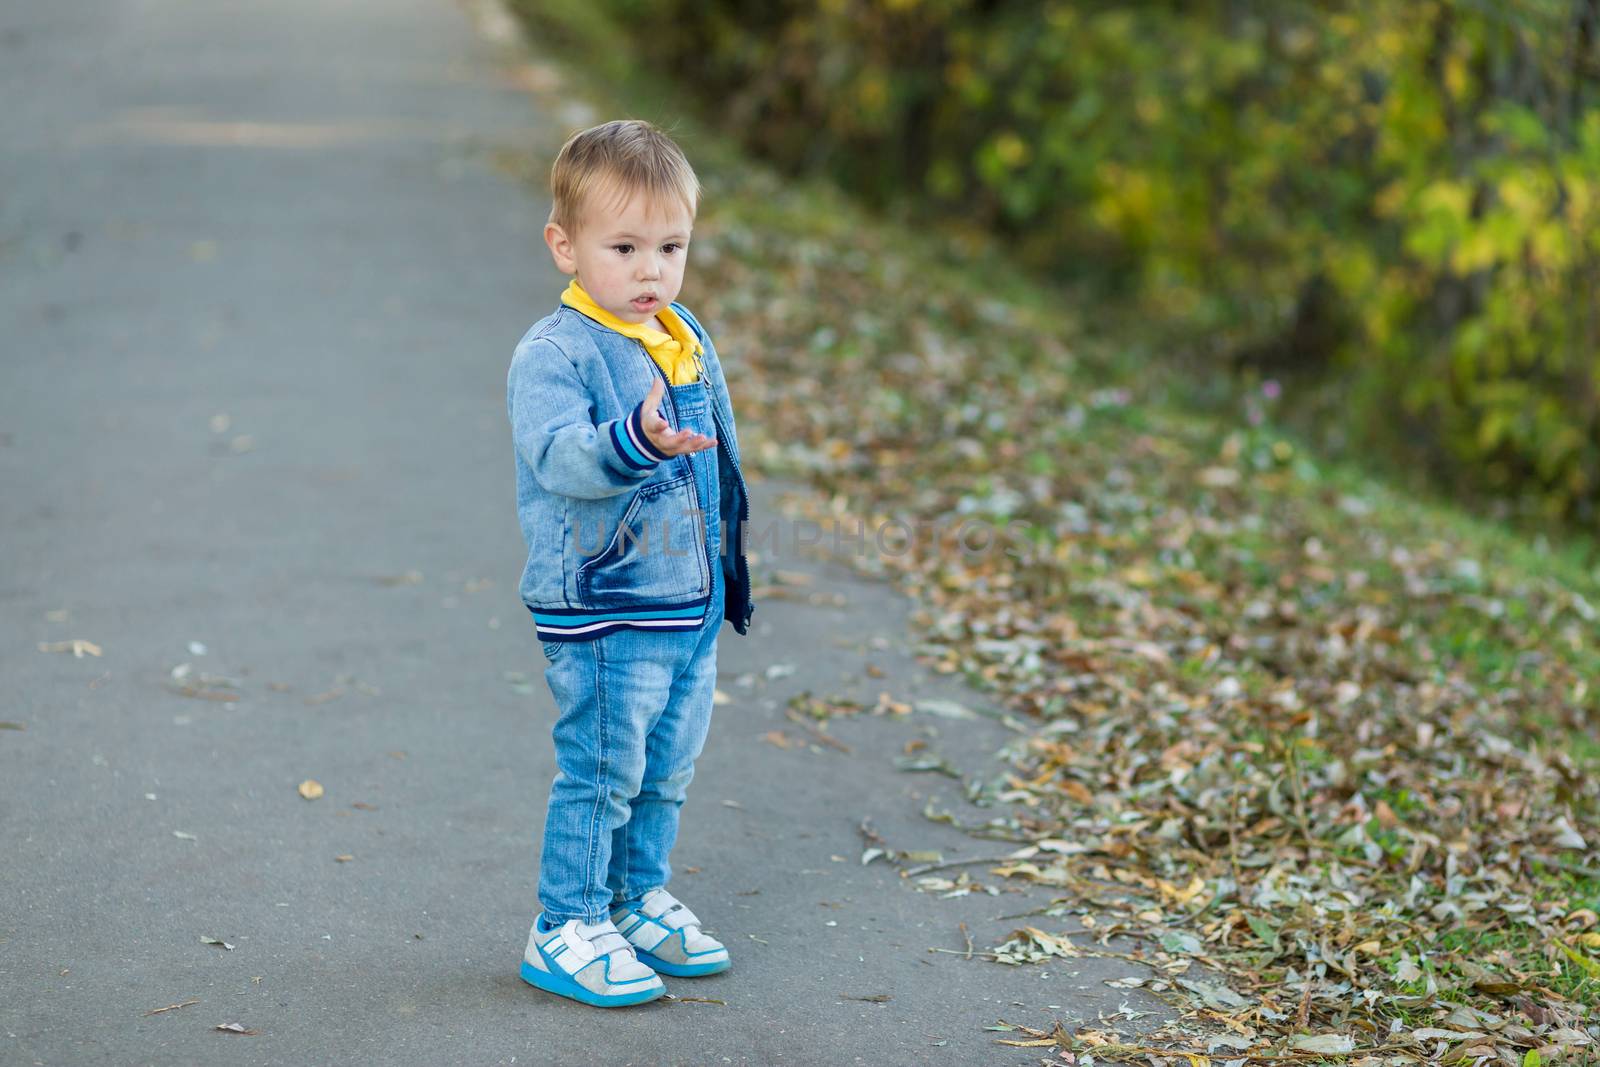 A little boy standing on the path in the in a city park and shows something with his hand with indignation one autumn evening